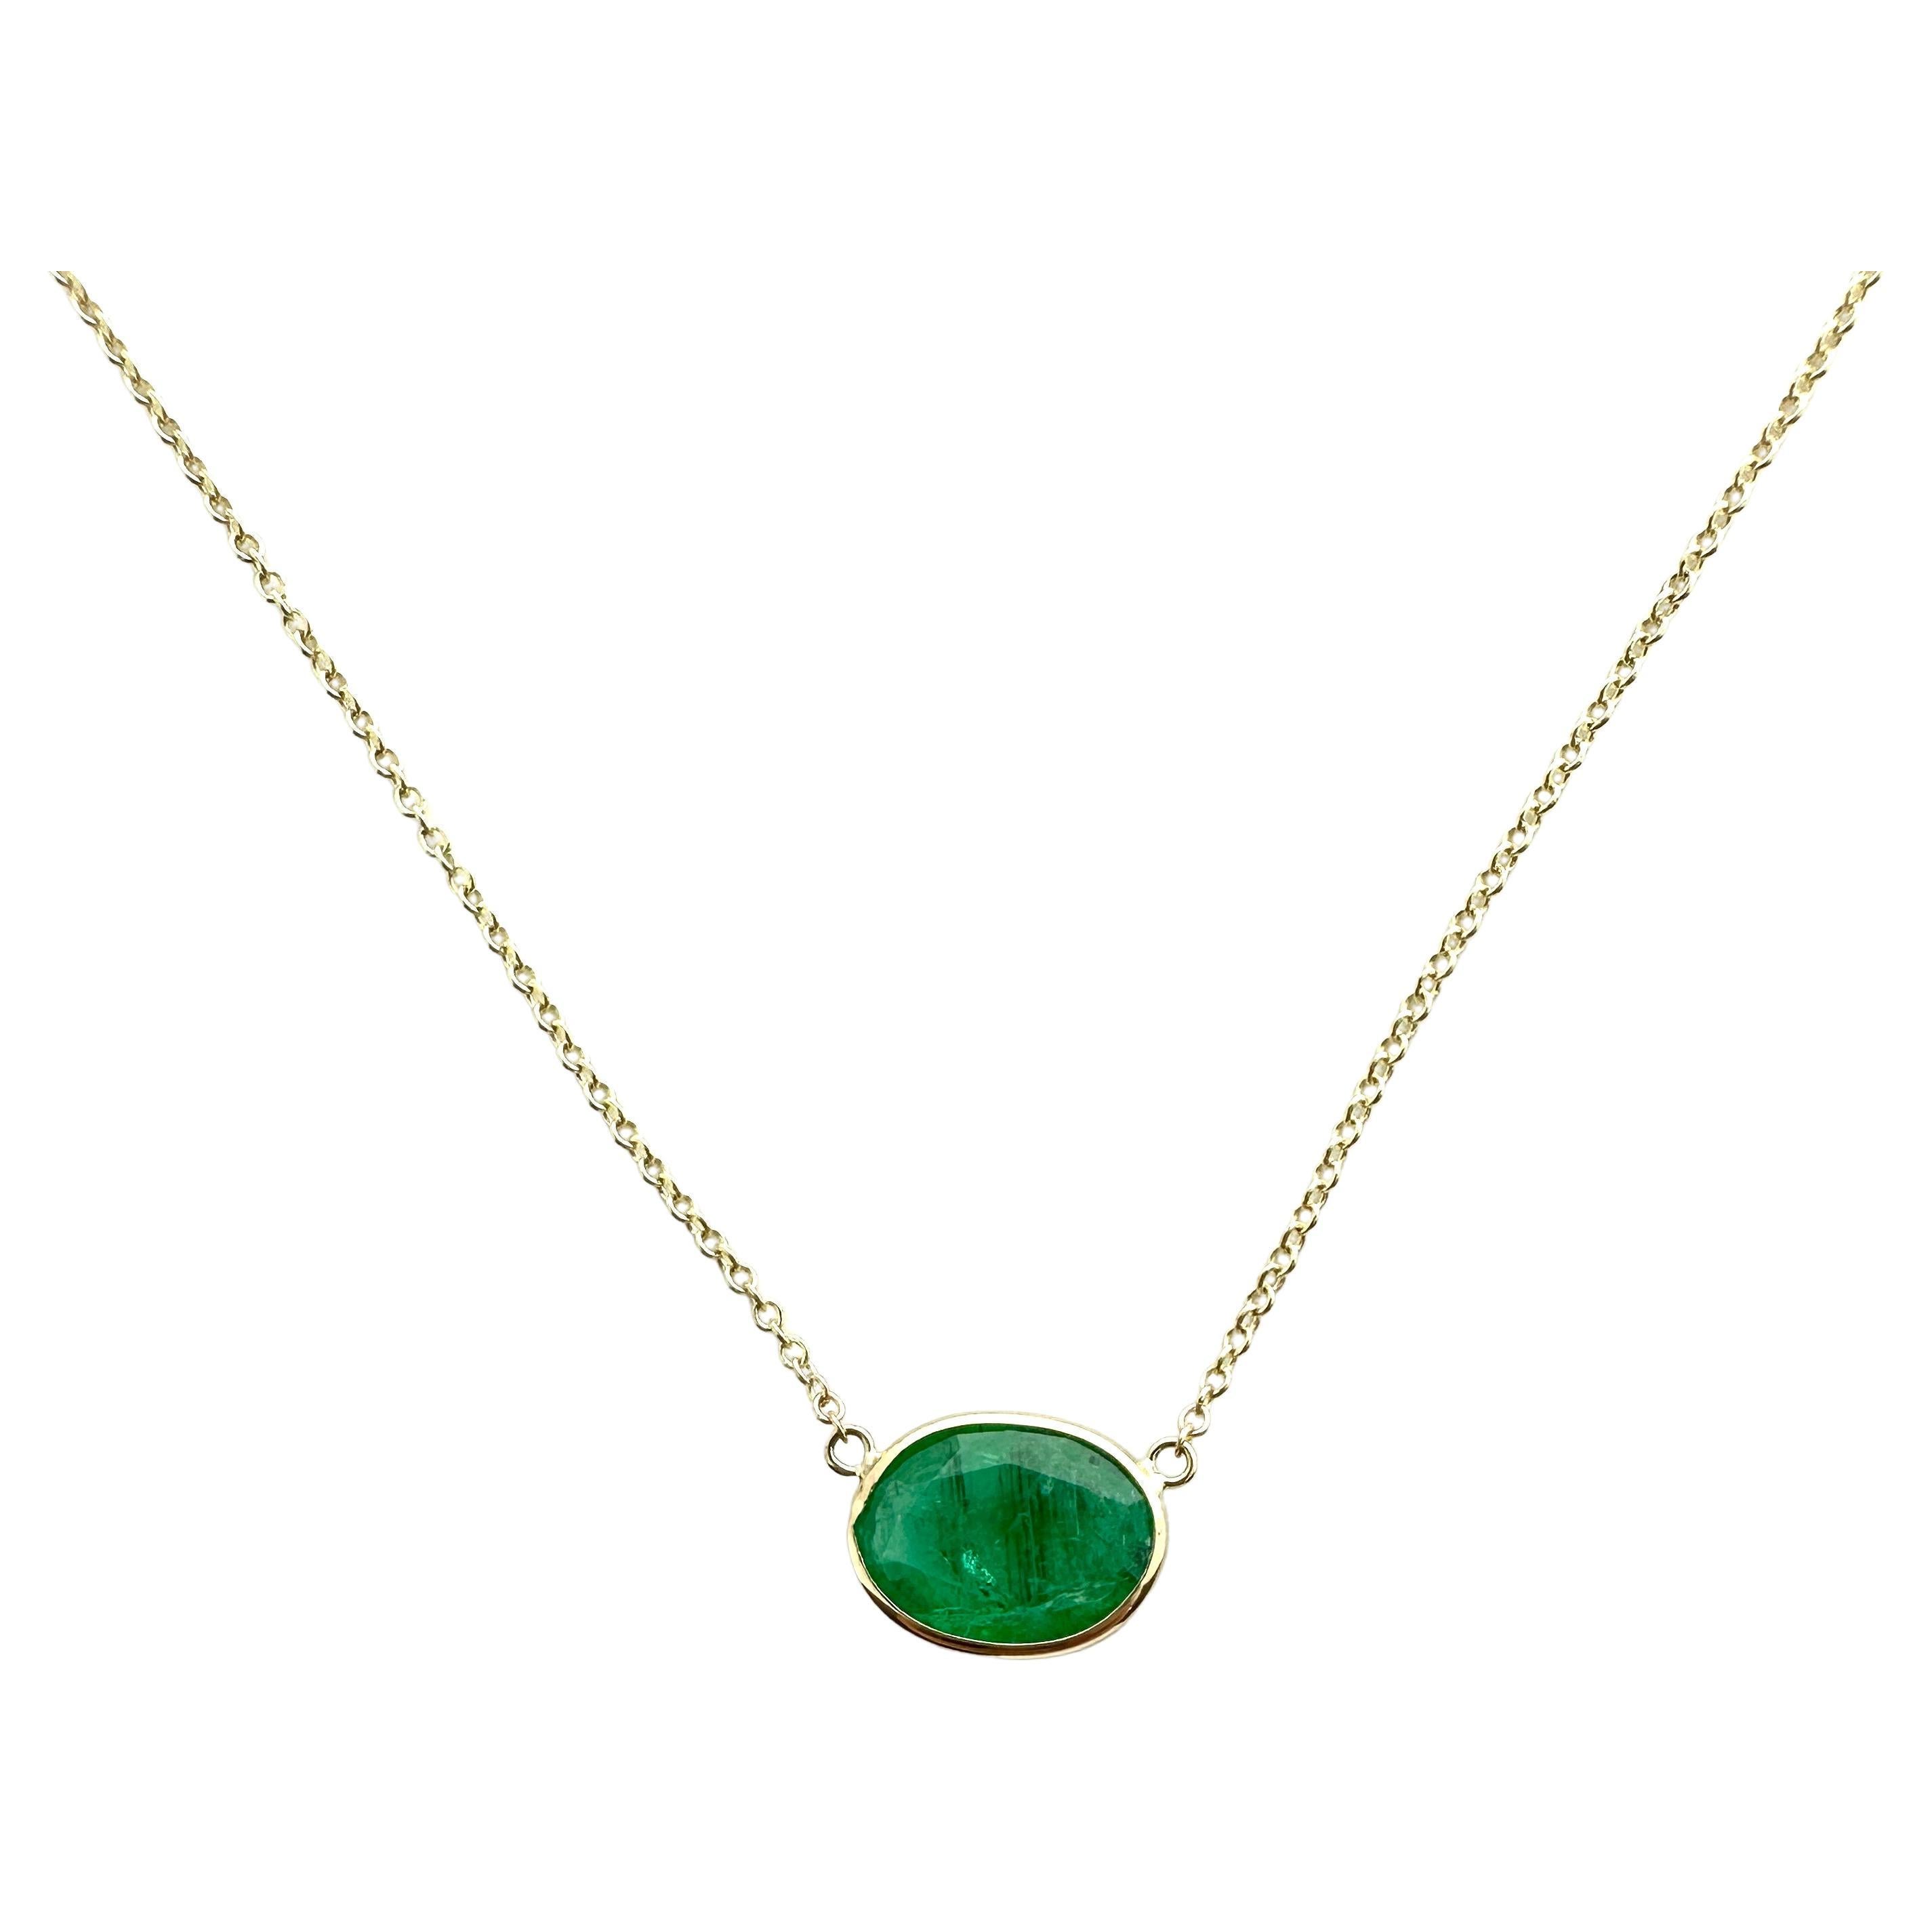 3.09 Carat Weight Green Emerald Oval Cut Solitaire Necklace in 14k Yellow Gold